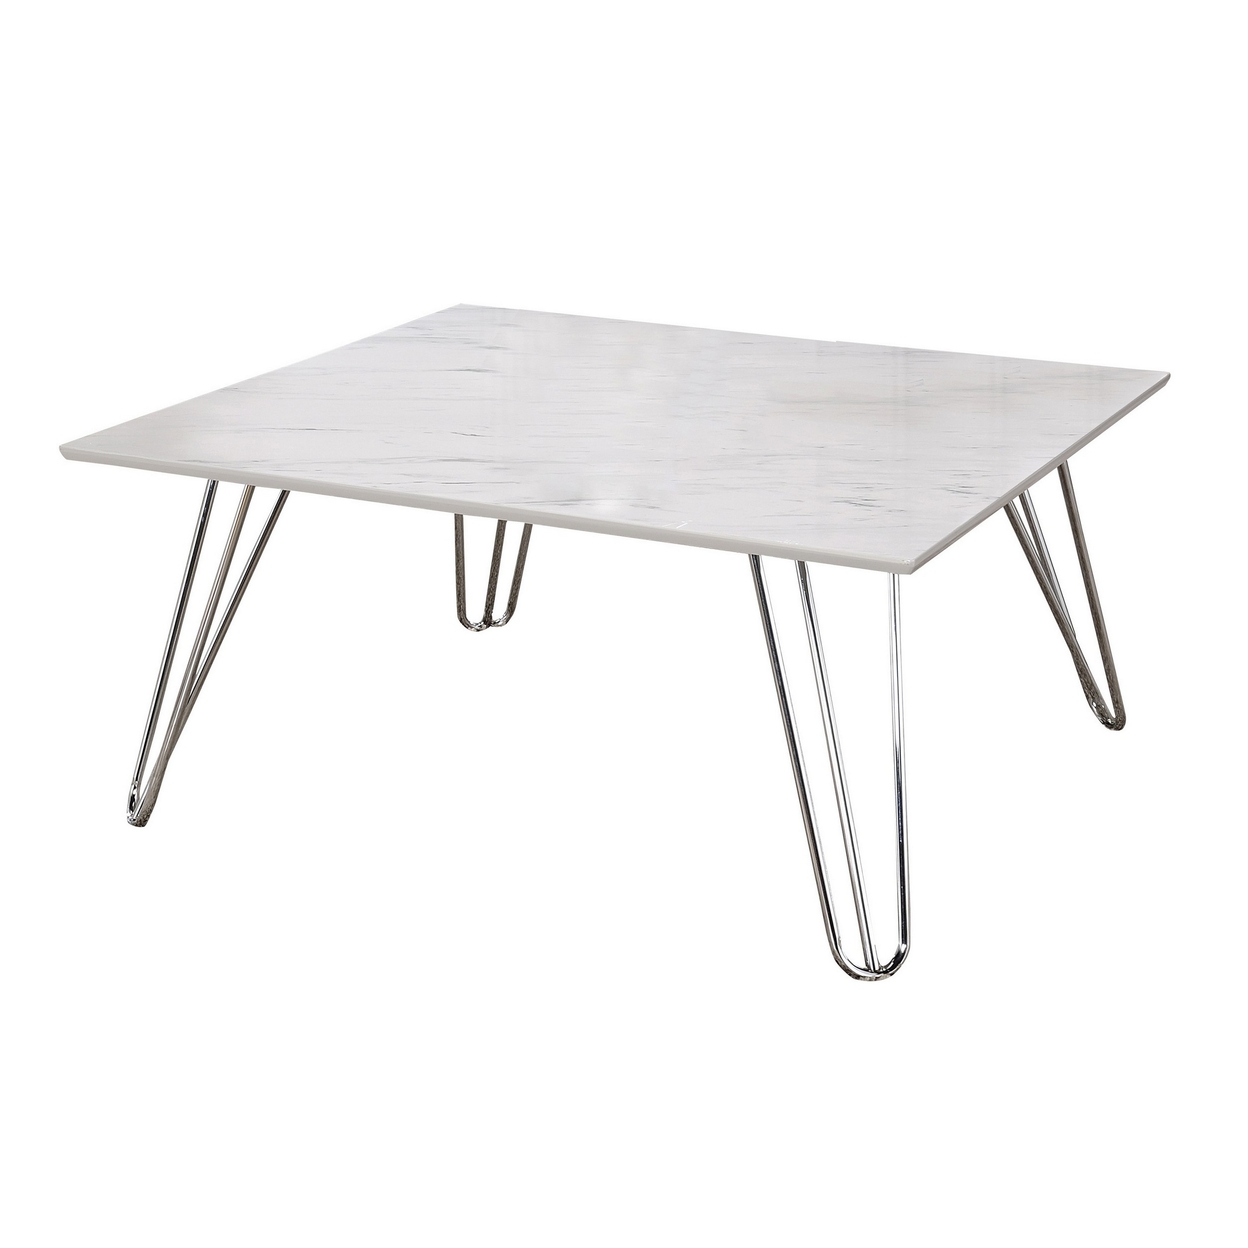 36 Inch Square Coffee Table With White Faux Marble Top, Chrome Hairpin Legs- Saltoro Sherpi